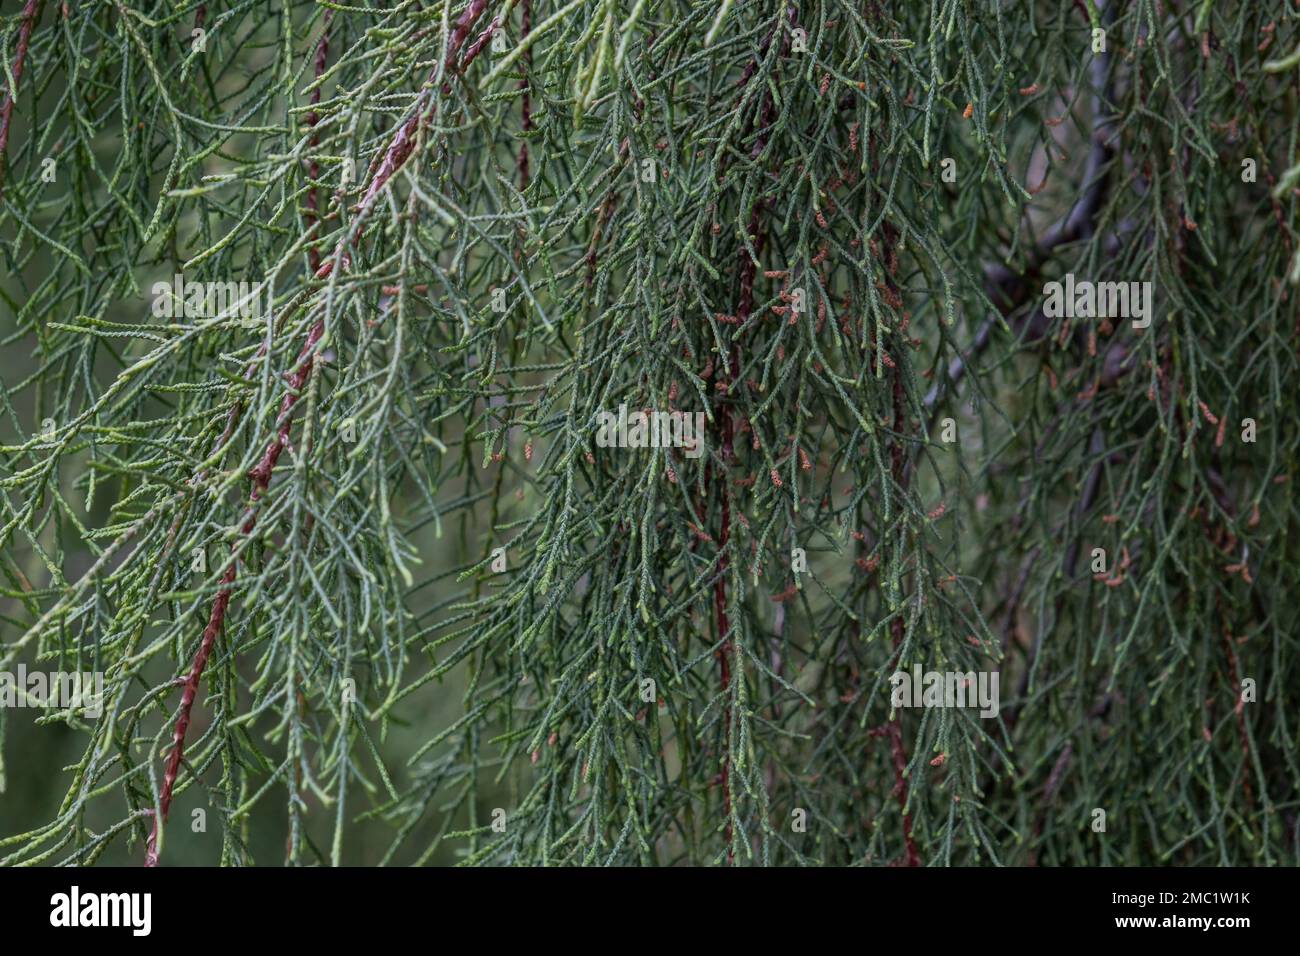 Bhutan cypress  (Cupressus cashmeriana) evergreen penduluos foliage with young seed cones Stock Photo